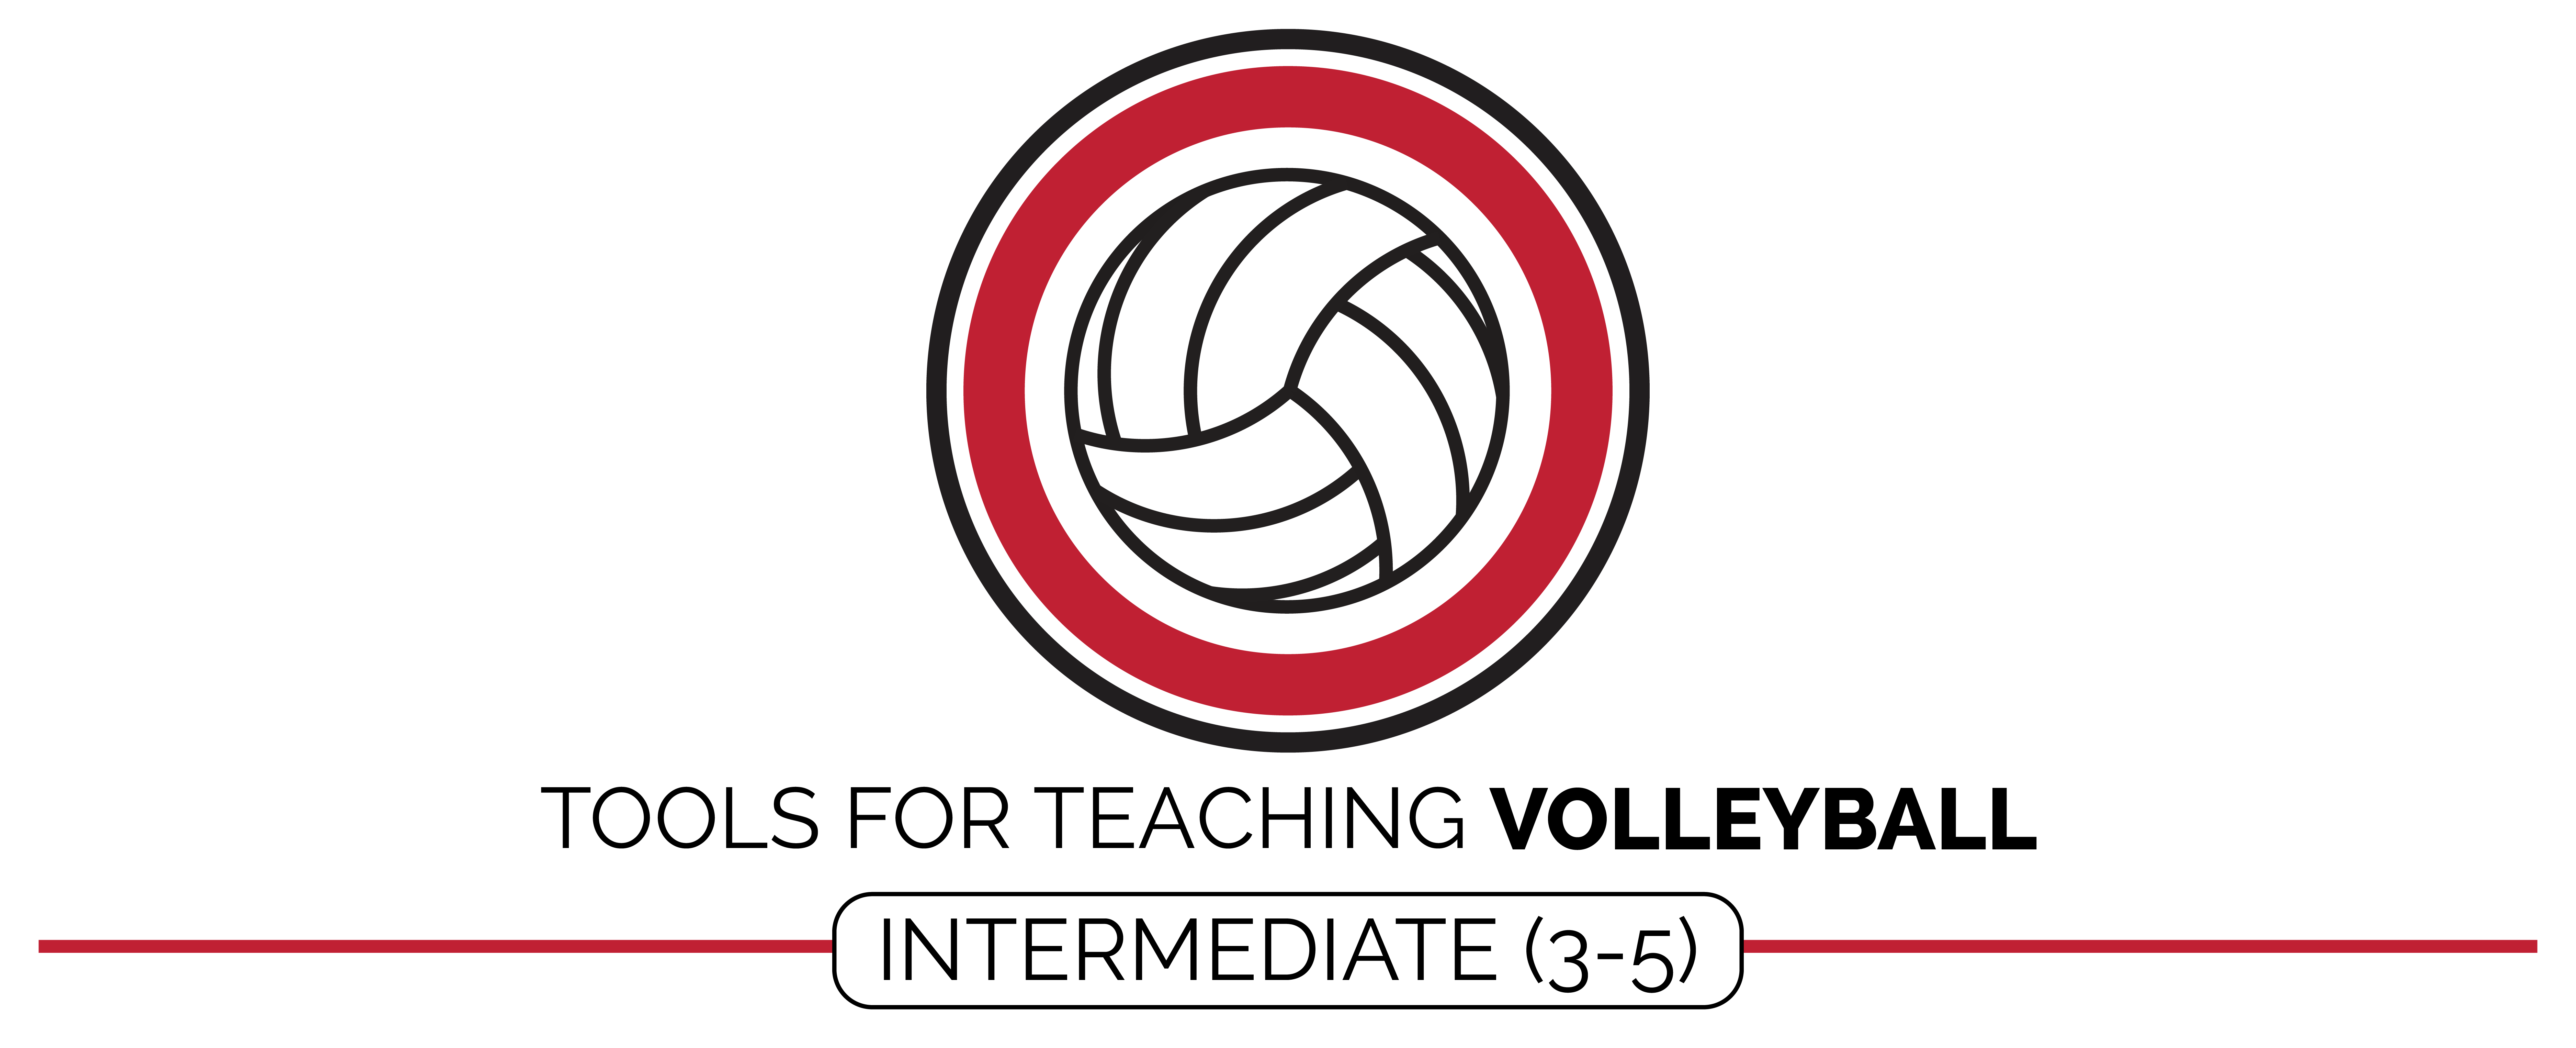 Volleyball Feature Image